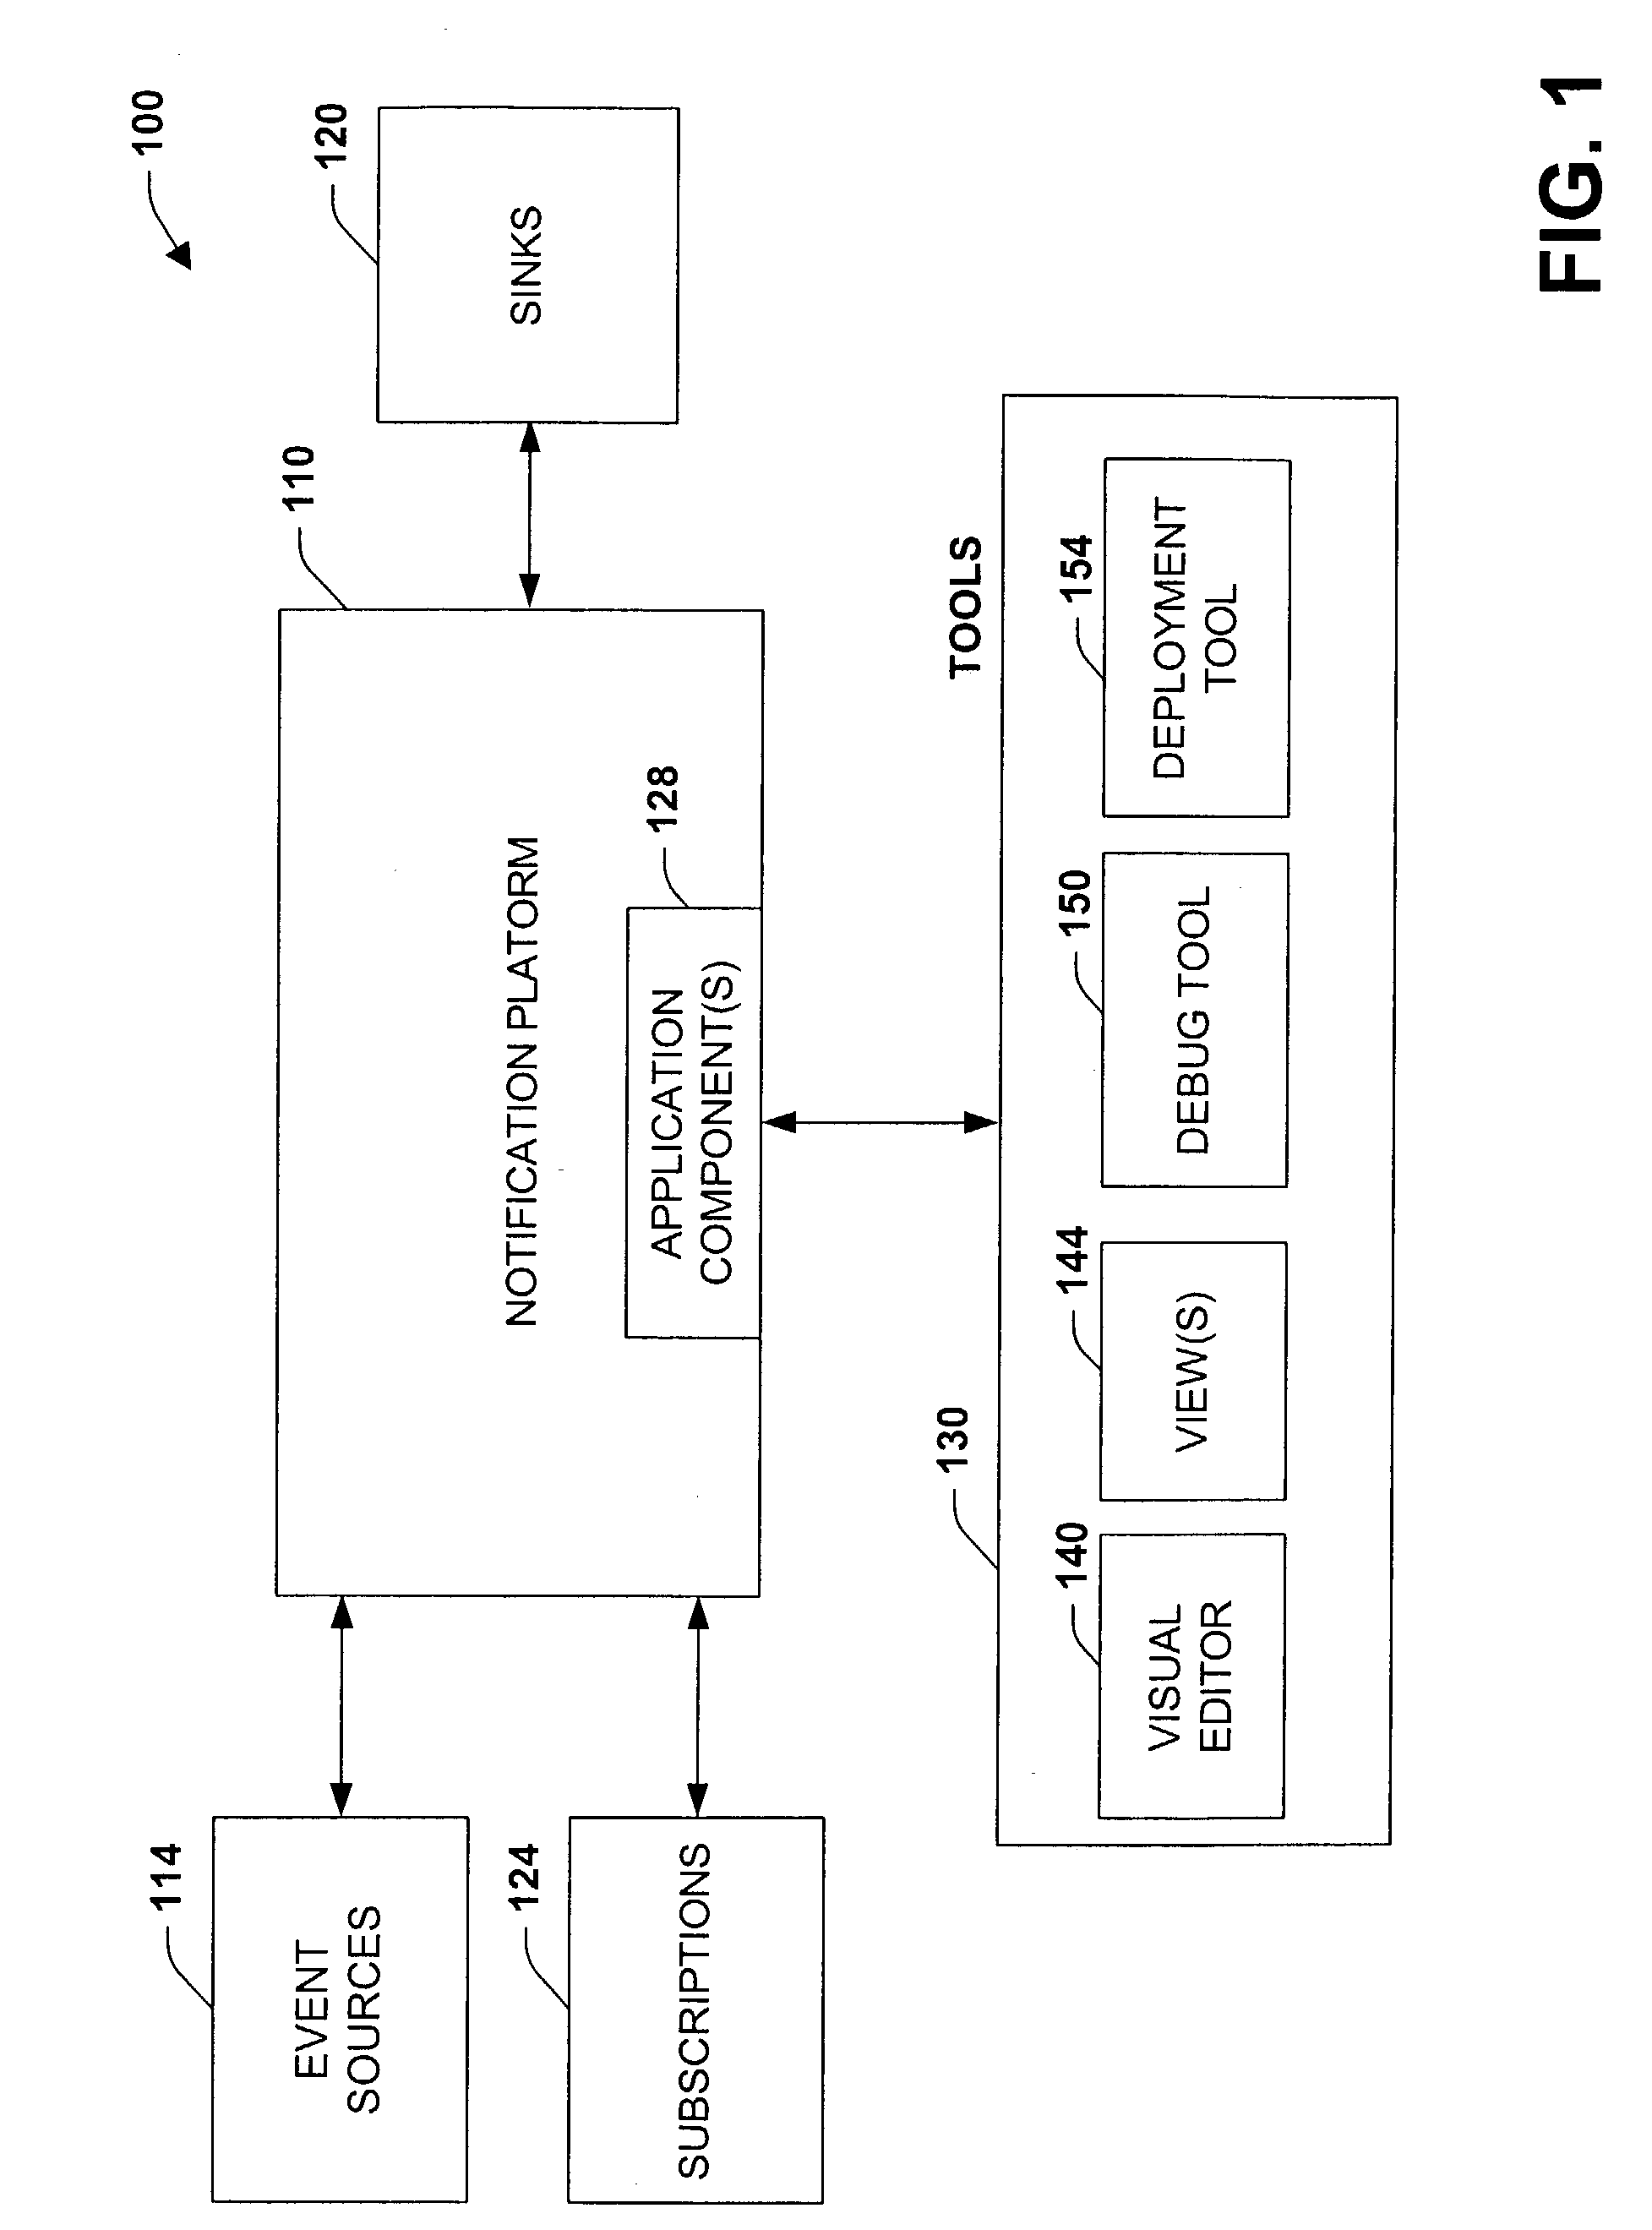 User interface system and methods for providing notification(s)